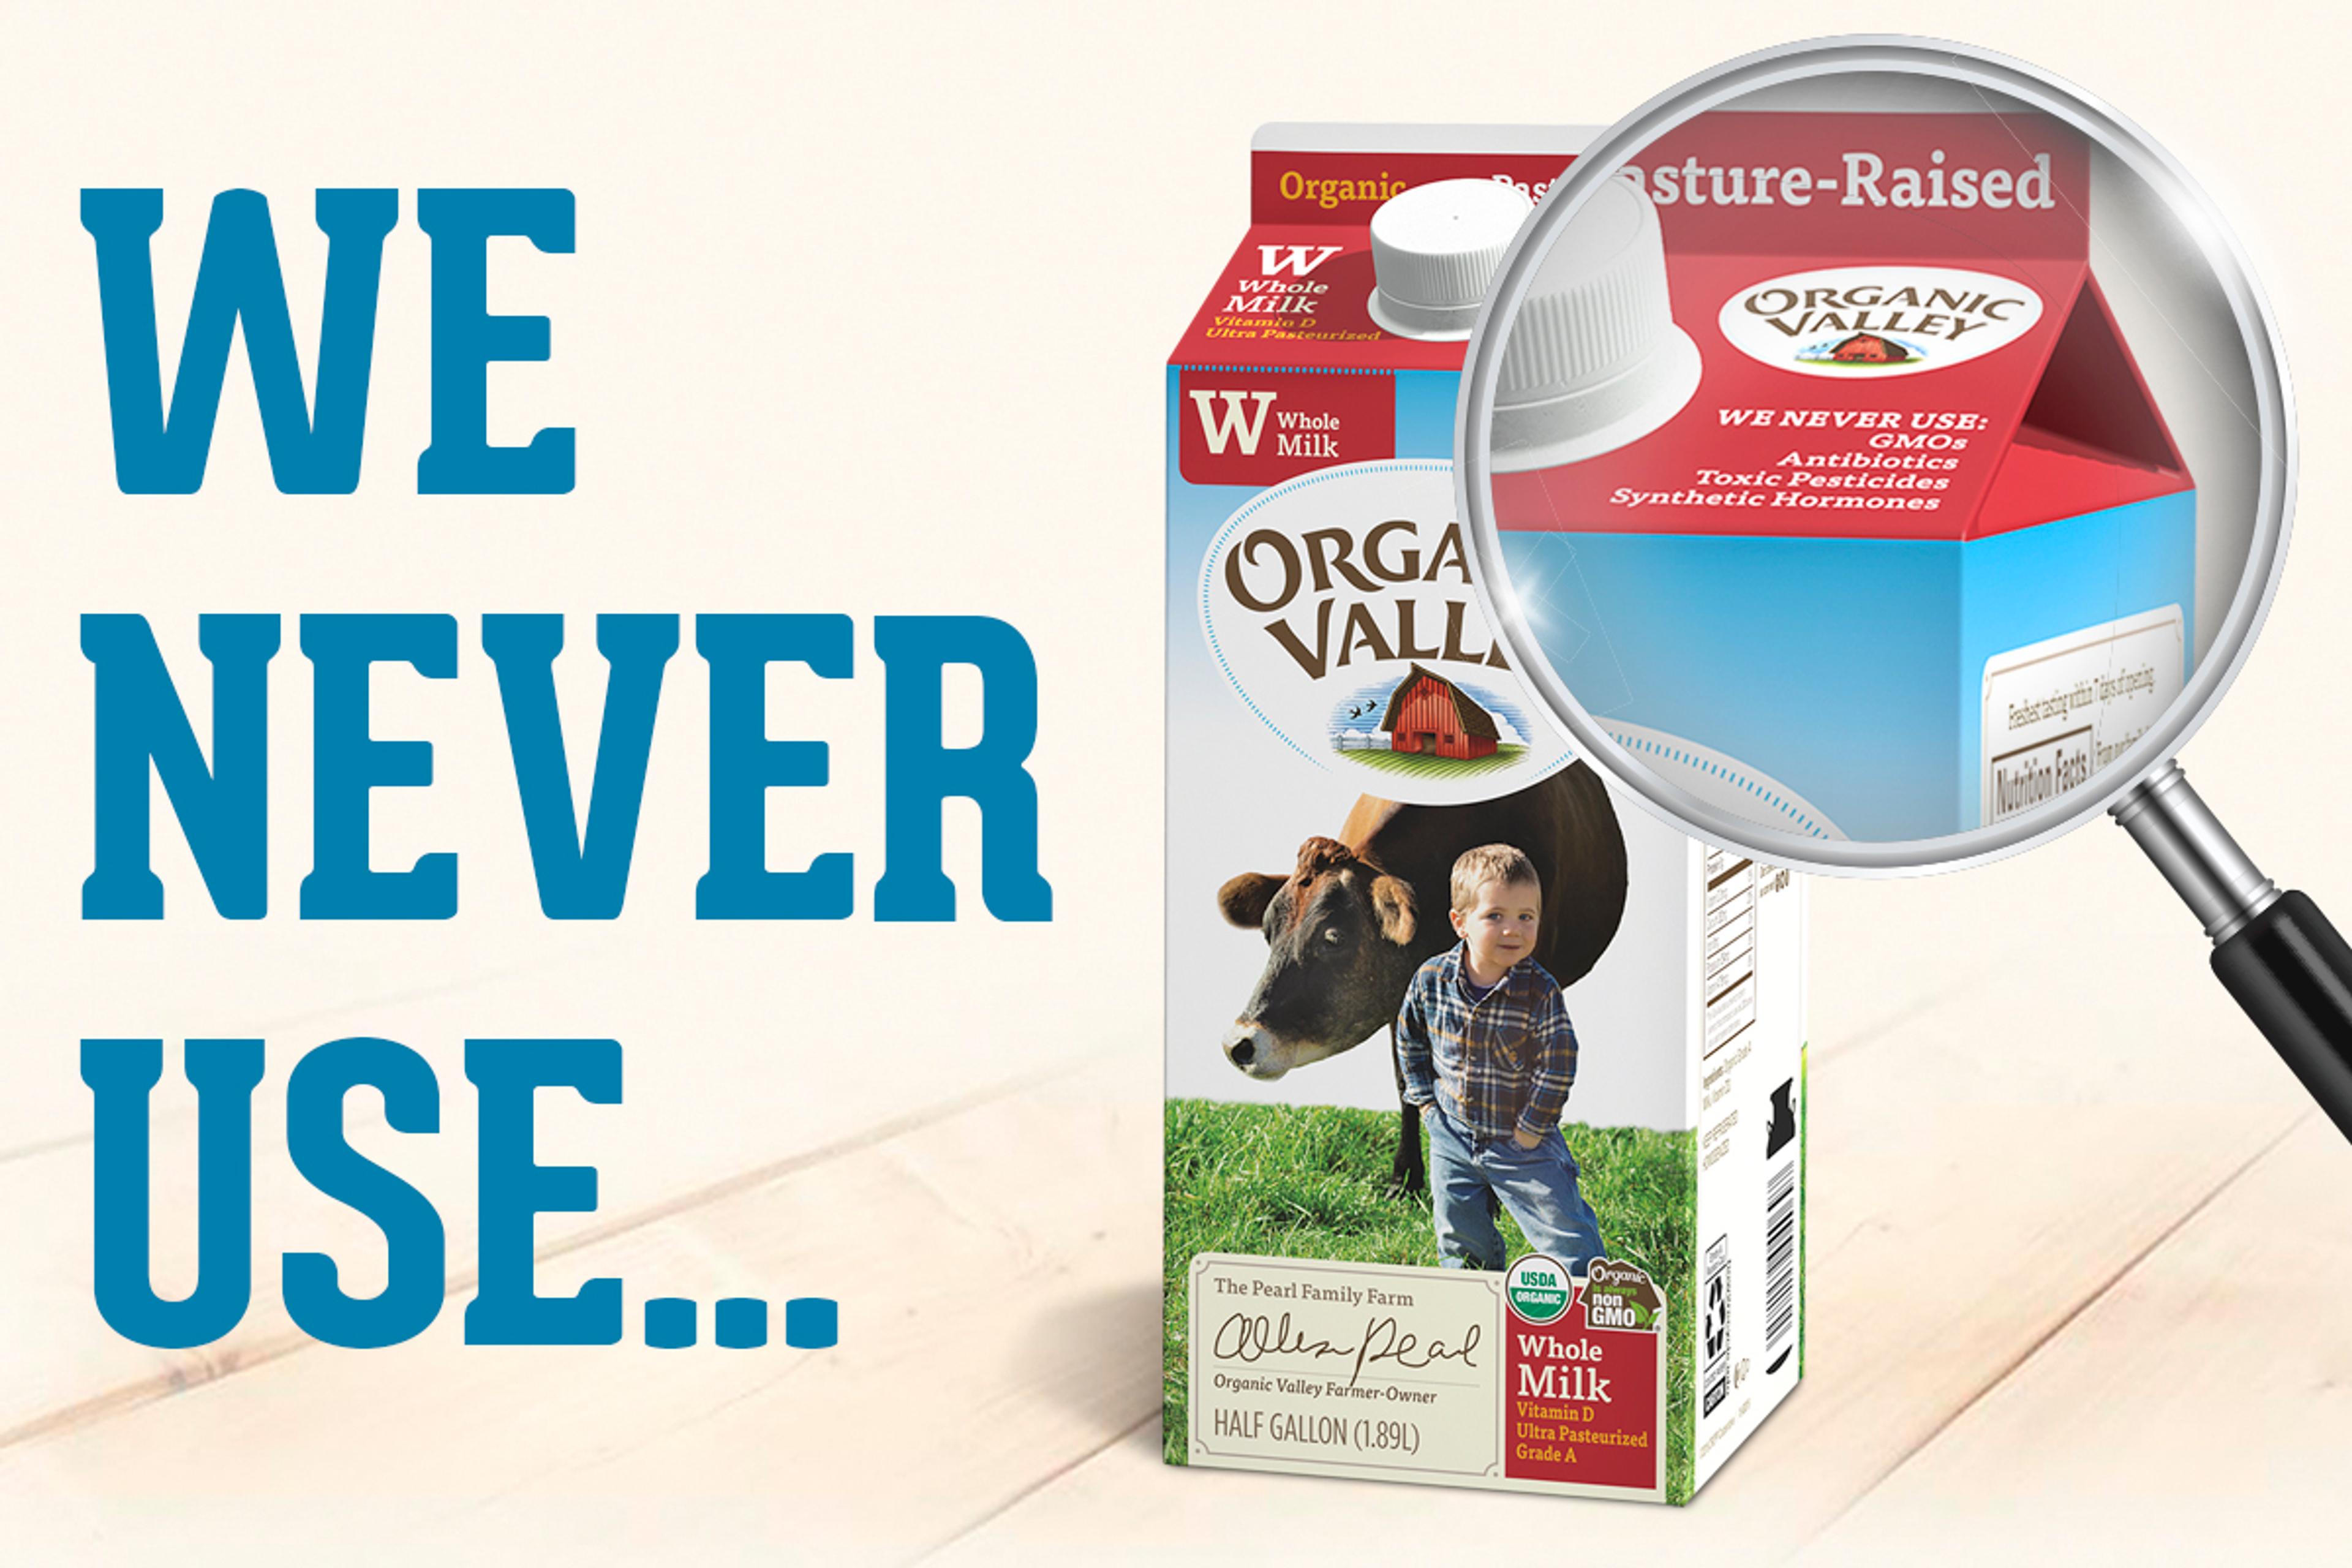 We never use statement magnified on an Organic Valley milk carton.